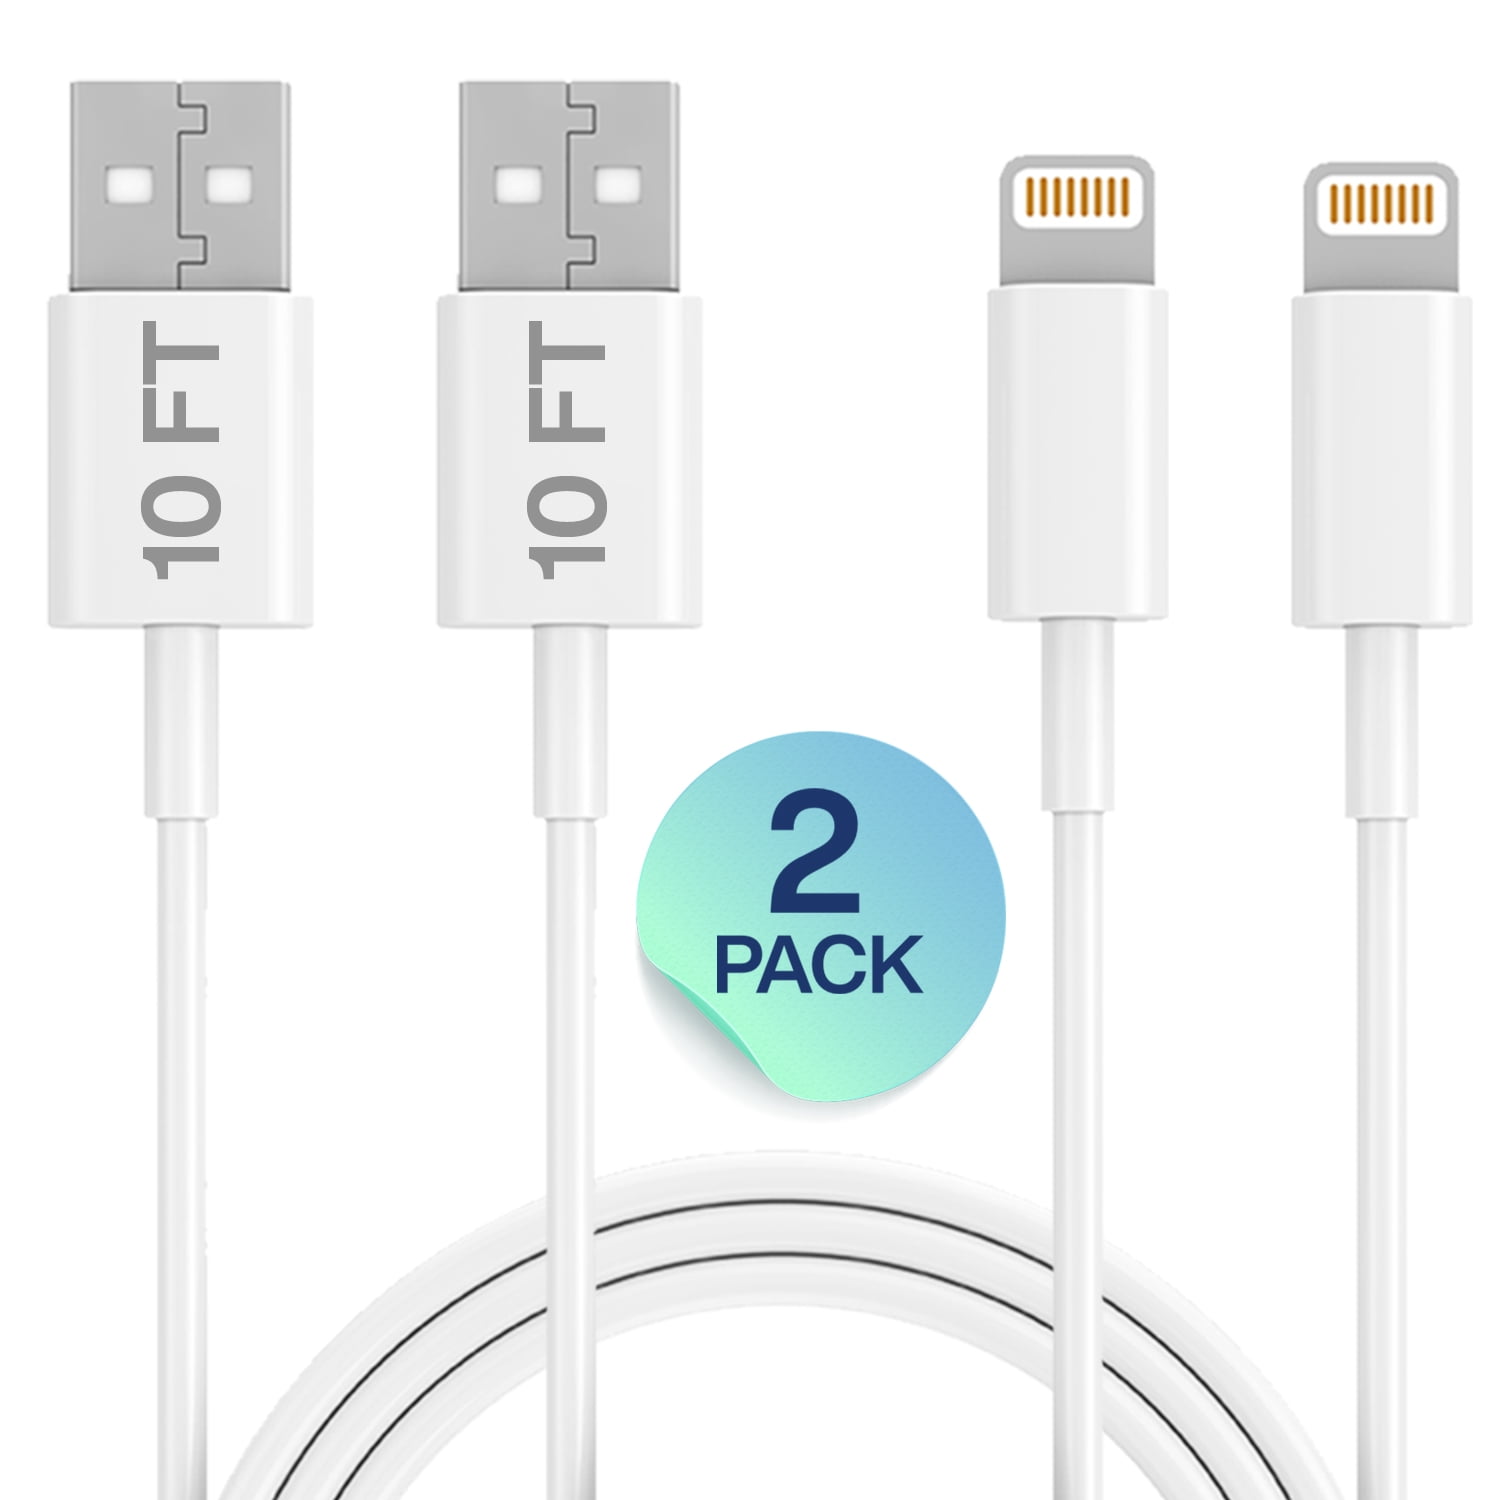 Charging & Syncing Cord Infinite Power iPhone Charger MFI Certified Lightning Cable Set for Apple iPhone Xs/Xs Max/XR/X/8/8 Plus/7/7 Plus/6S/6S Plus/Air/Mini/iPod Touch/Case 3 Pack 6FT USB Cable 